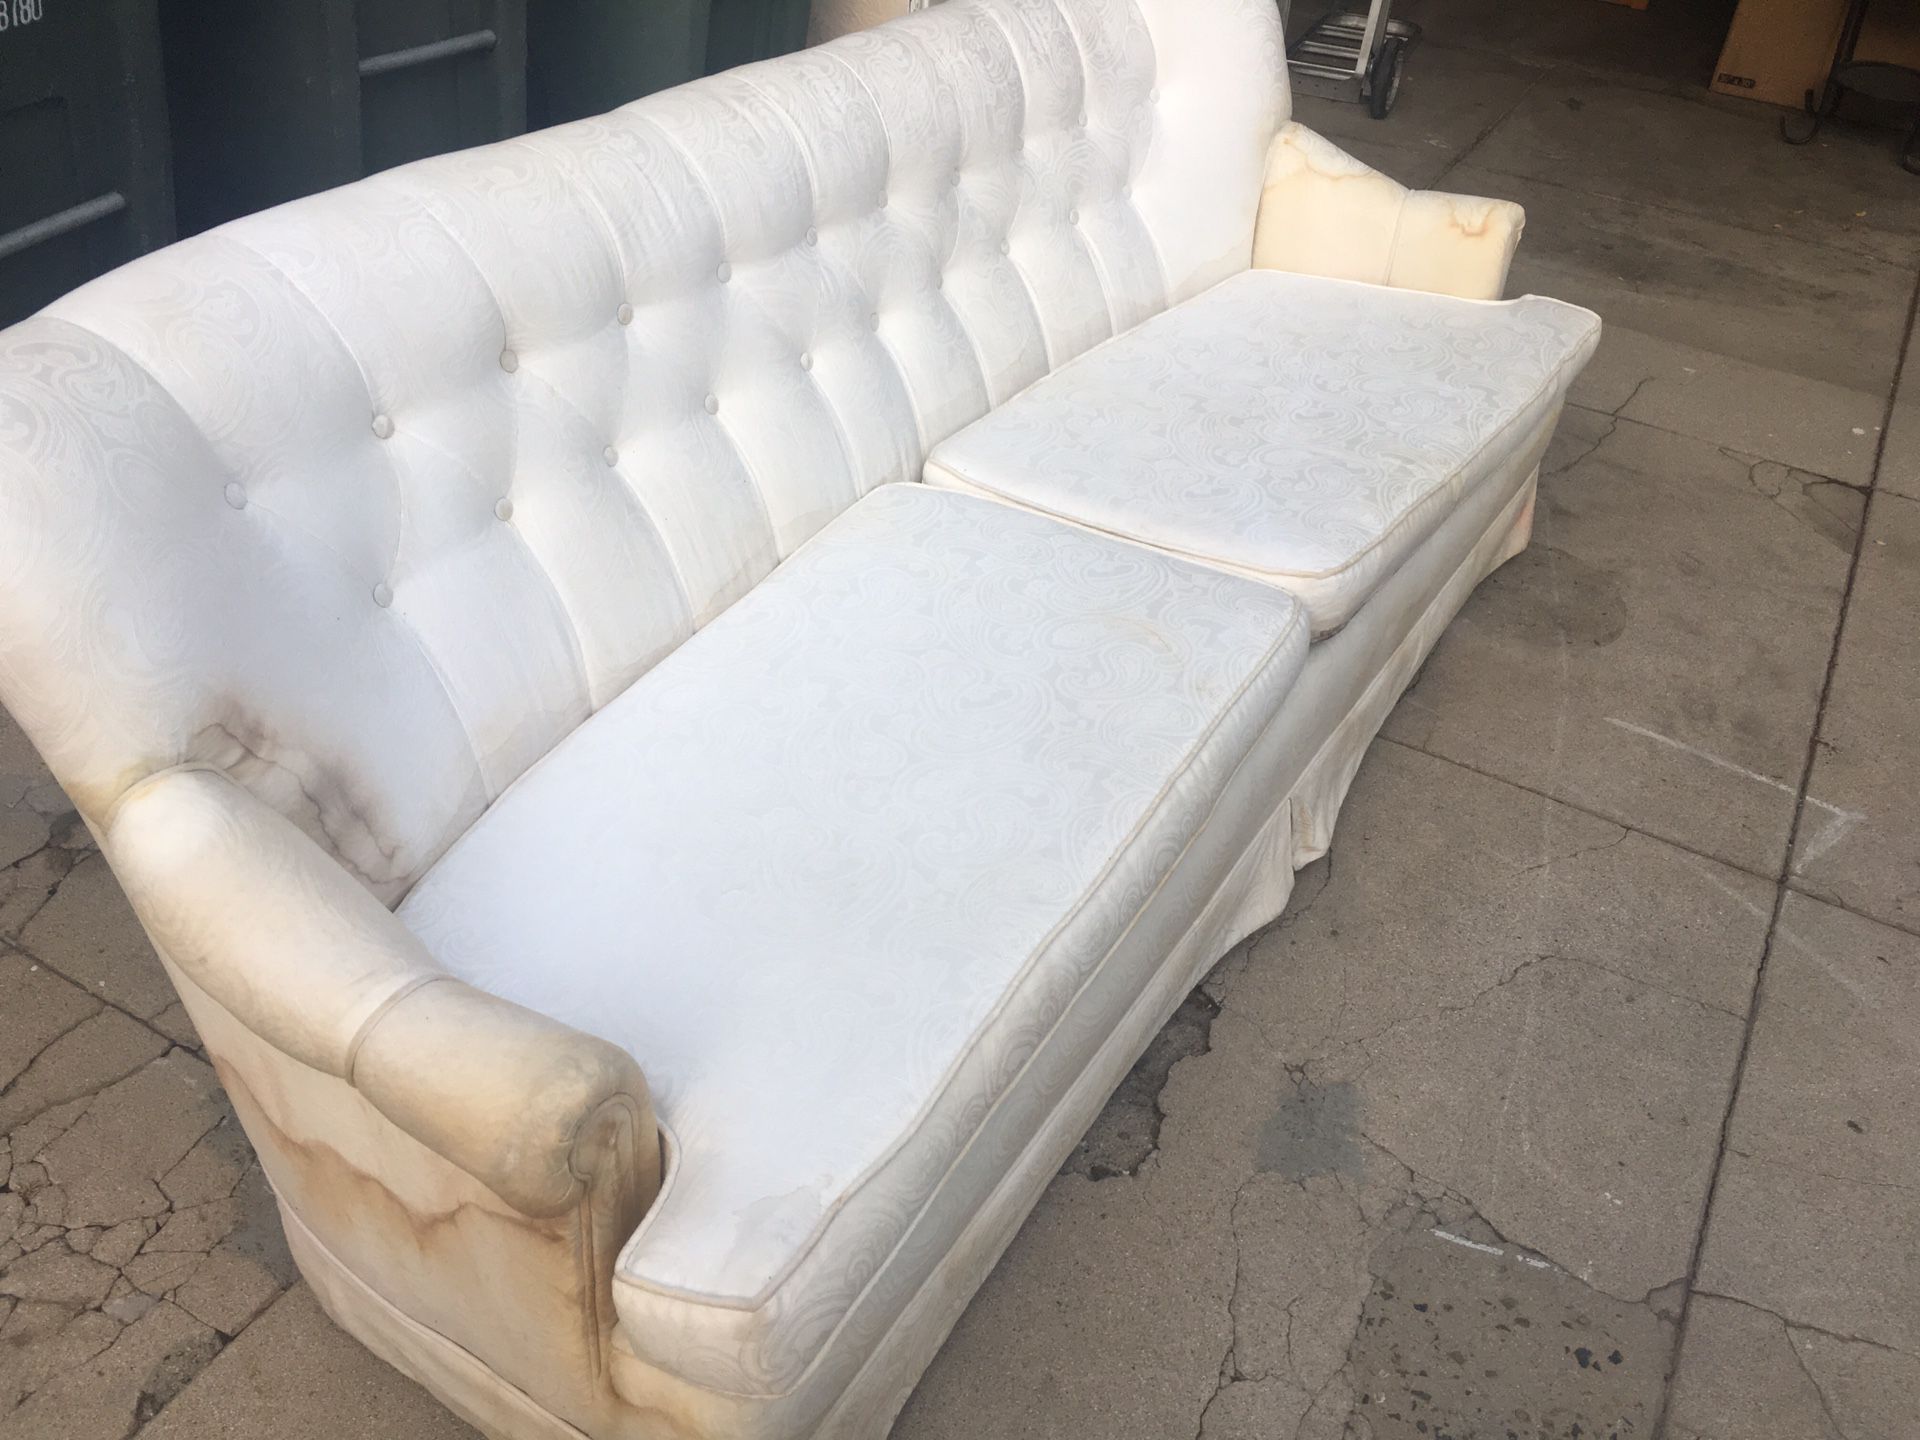 CURB ALERT FREE COUCH